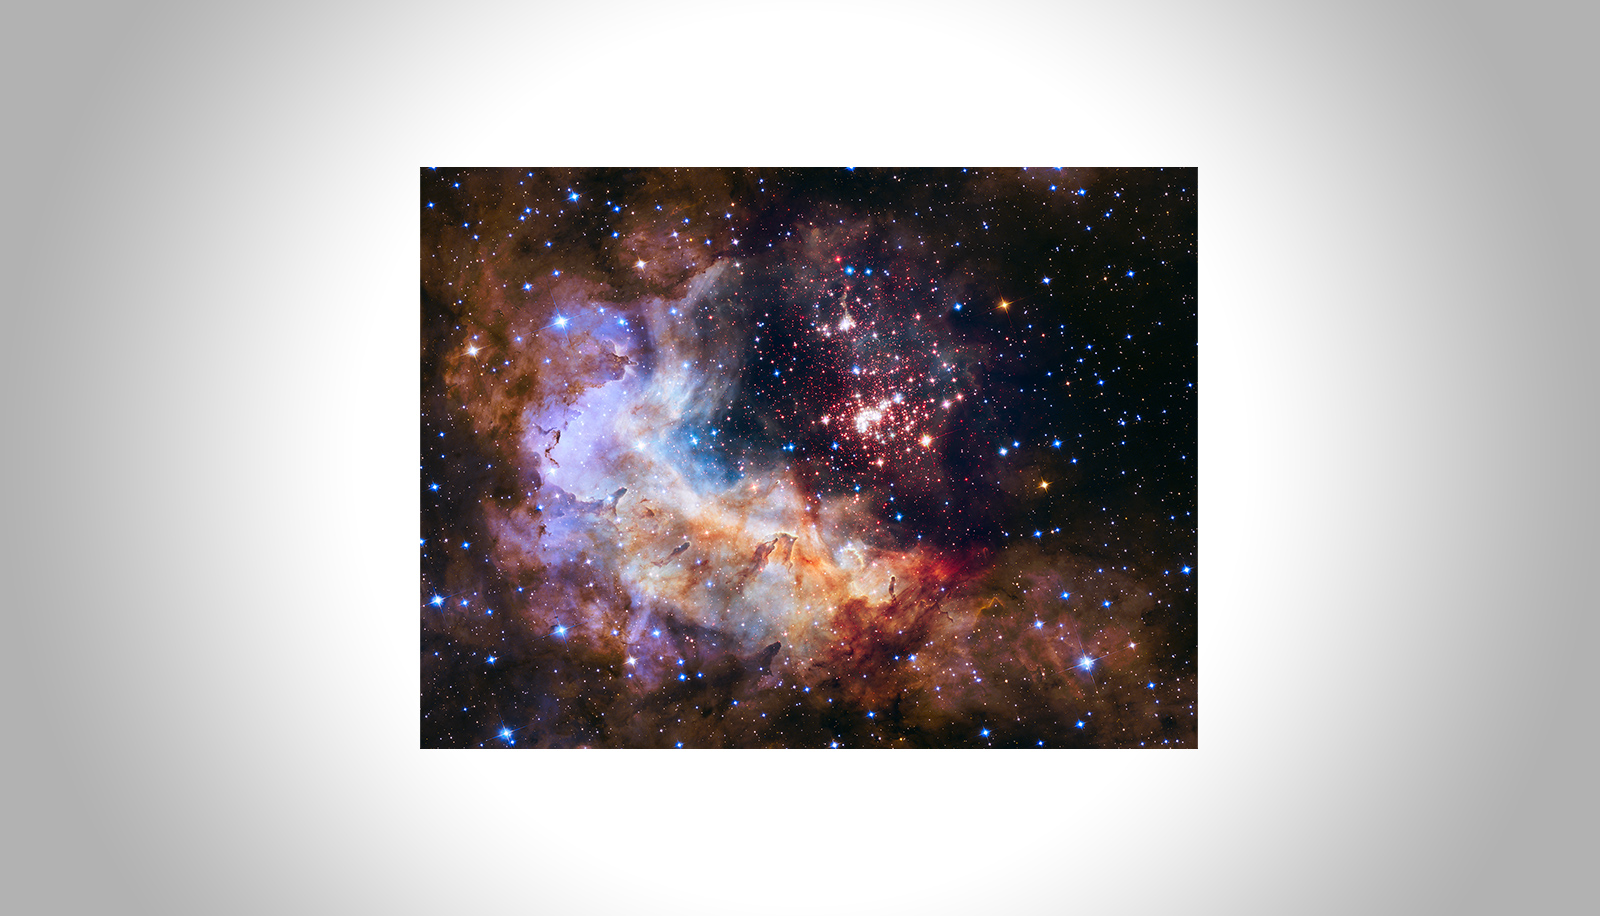 Example of a star-forming region with a young star cluster: Westerlund 2, aged 1-2 million years, located in the constellation Carina.